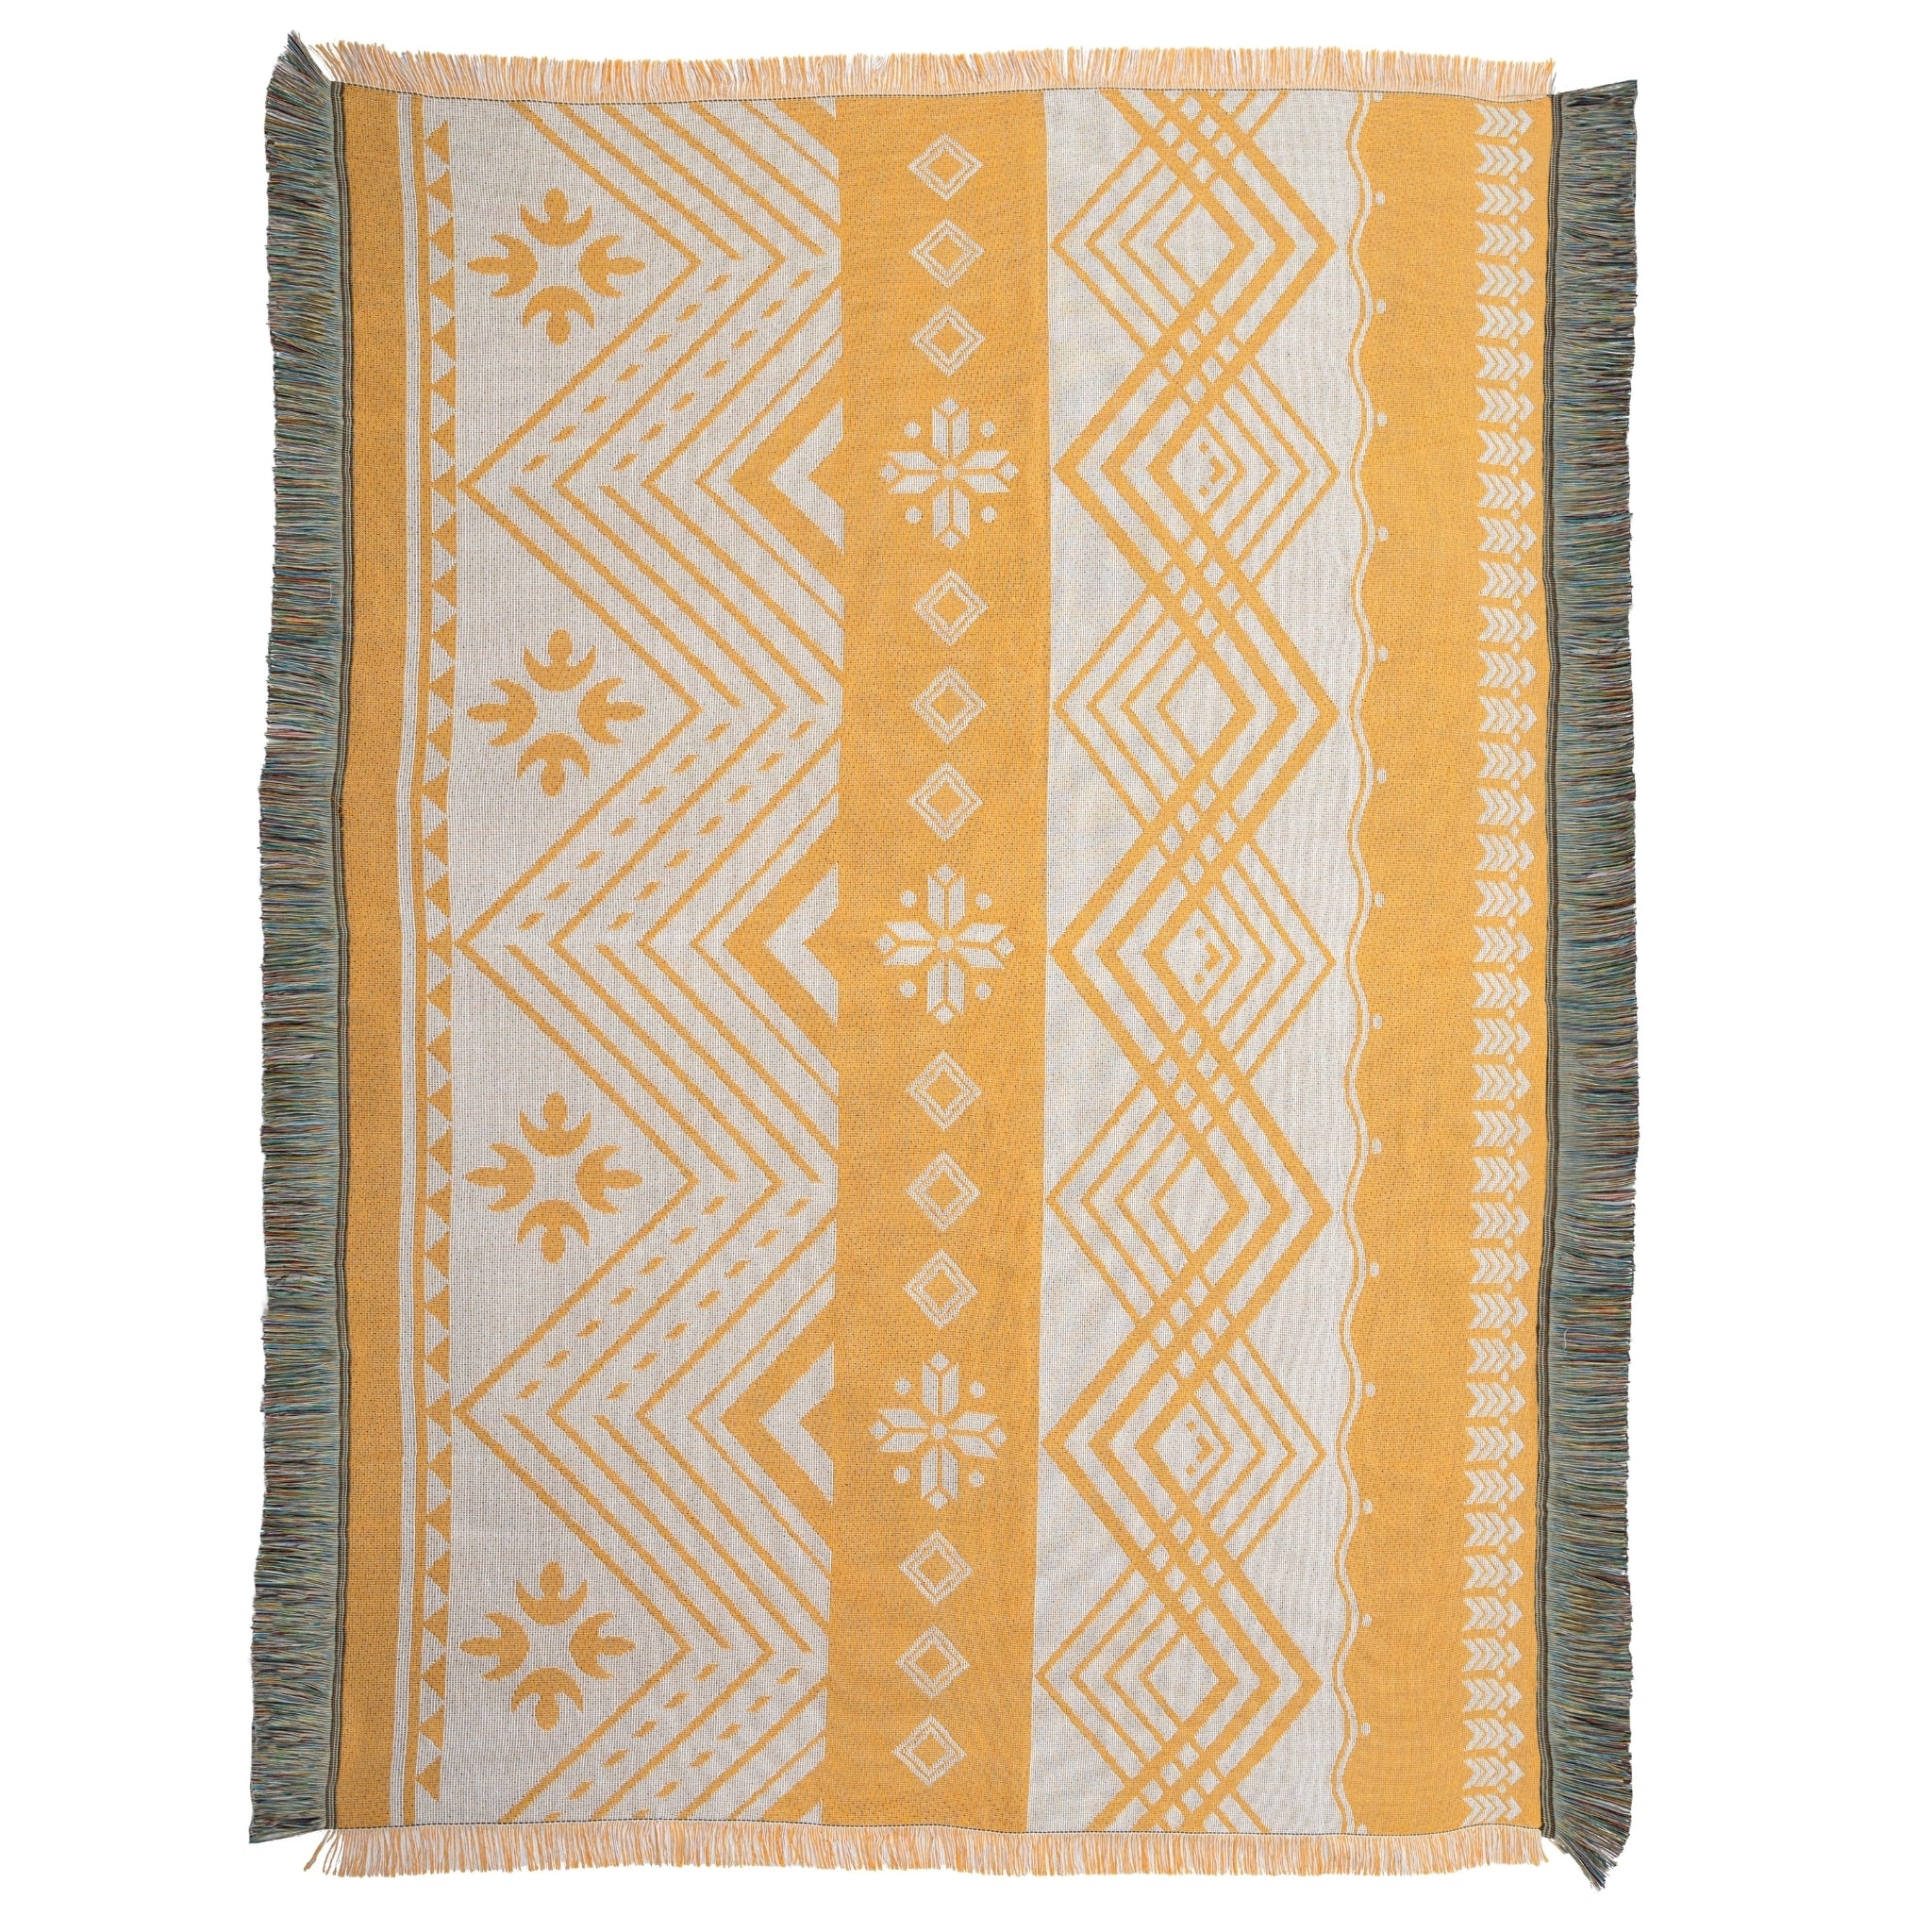 The Sunrise Throw Rug – One Size – Recycled polyester – Sand & Salt